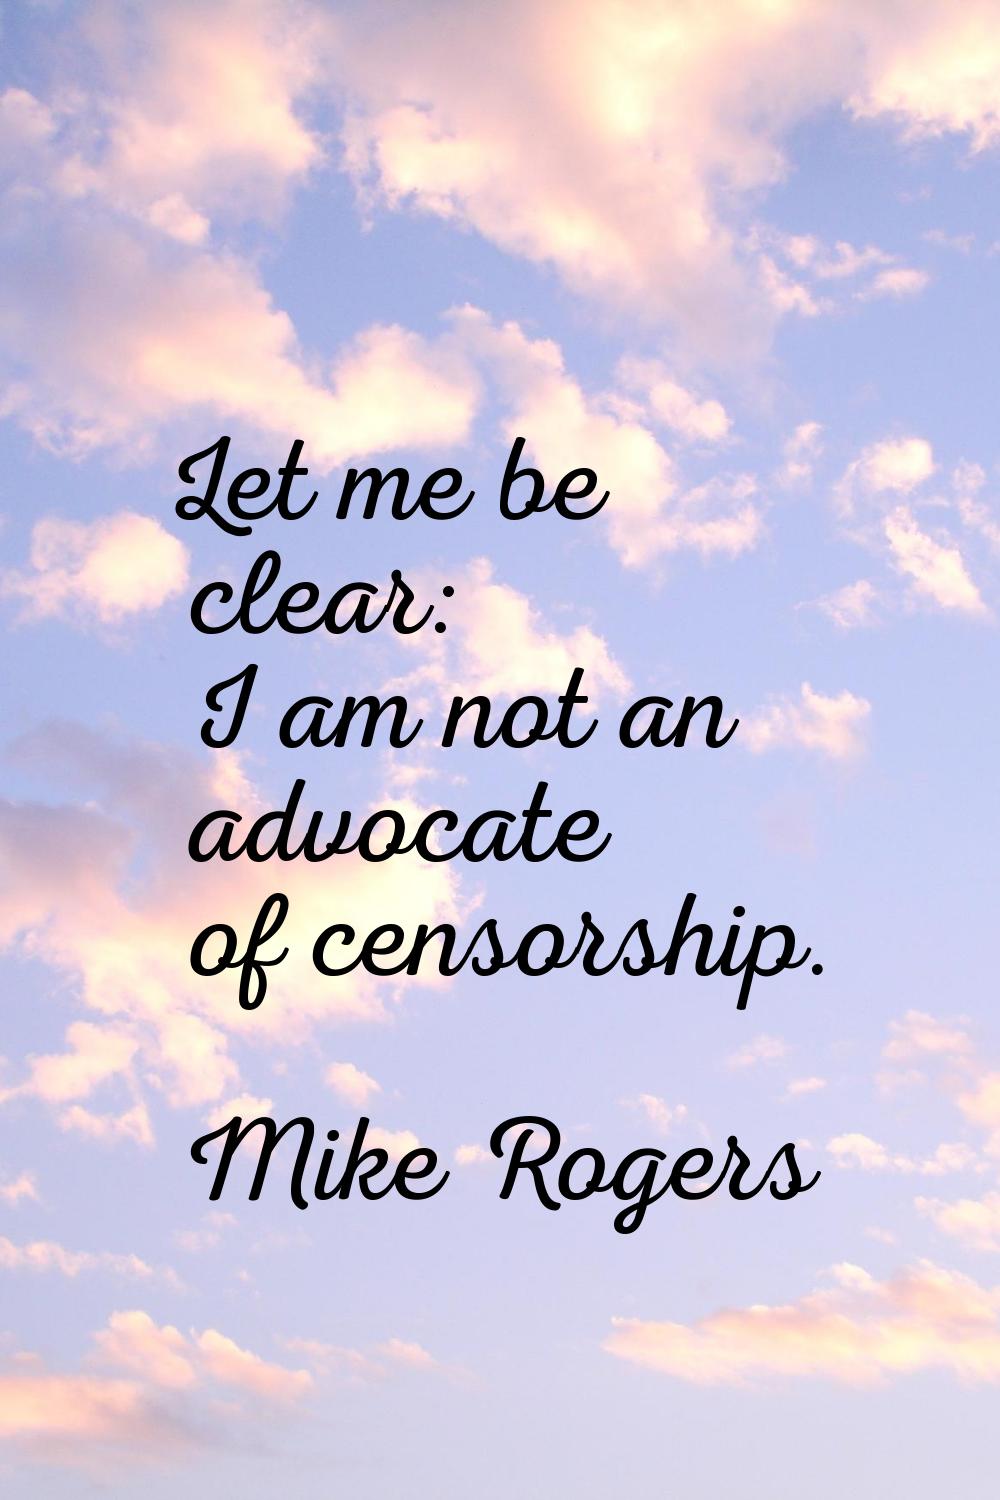 Let me be clear: I am not an advocate of censorship.